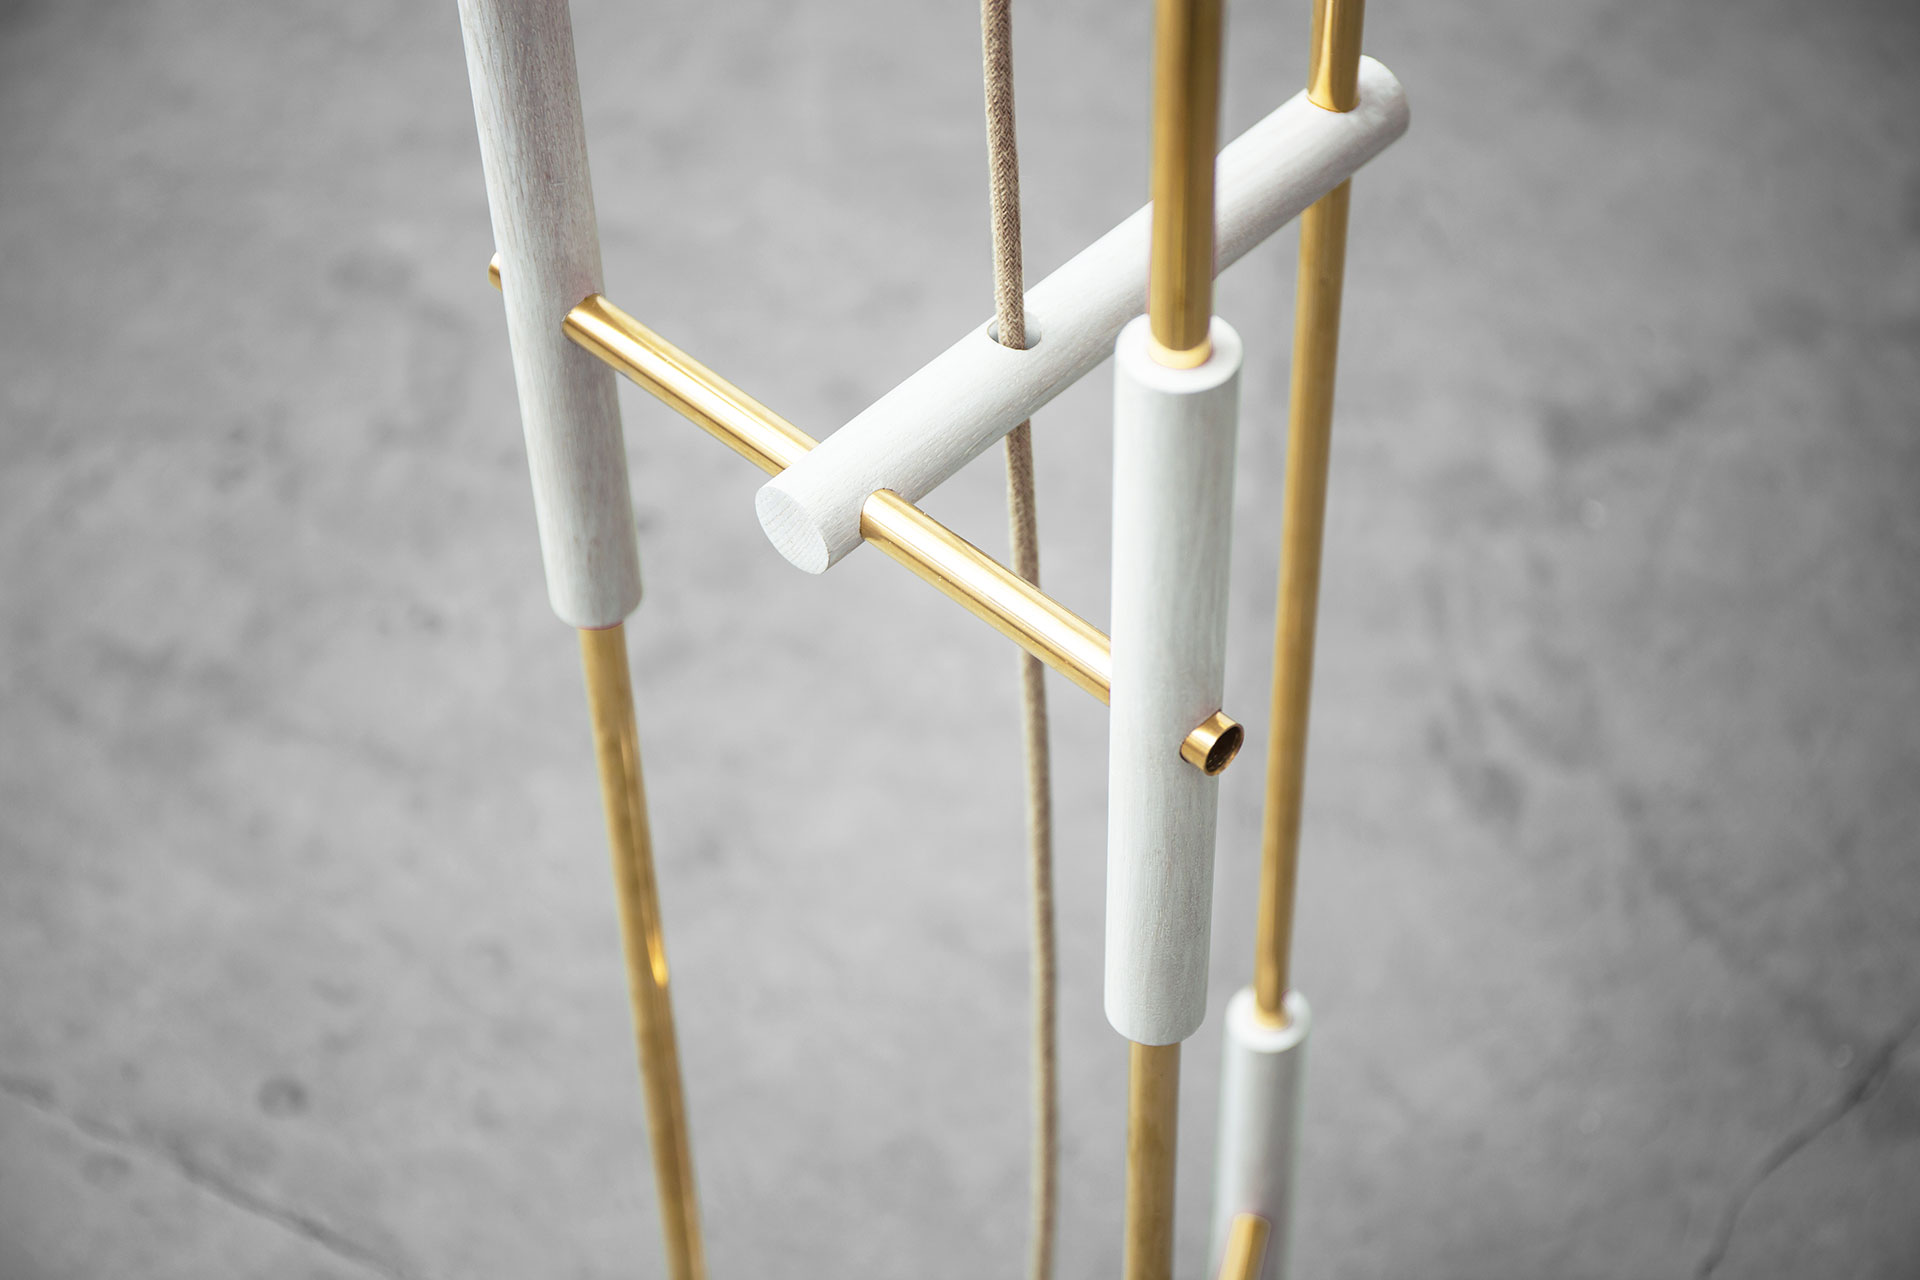 Modern design floor lamp in gold brass and white wood inspired by the art of the Japanese joinery